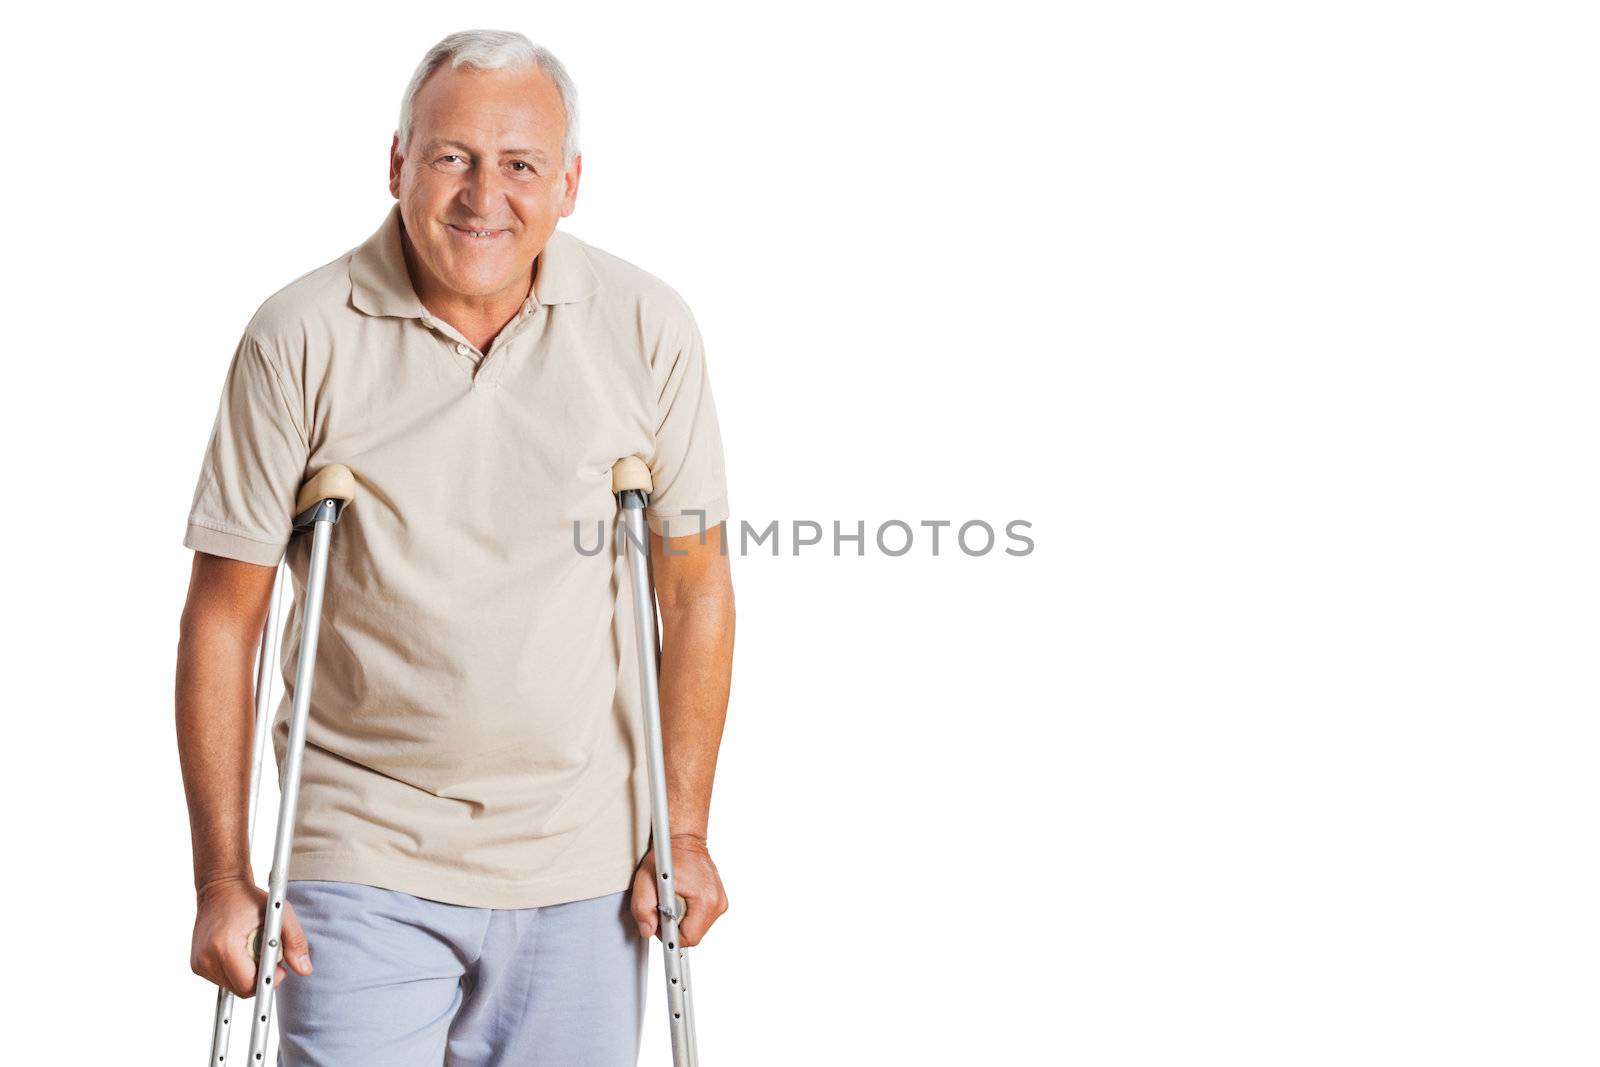 Portrait of smiling senior man on crutches standing over white background.